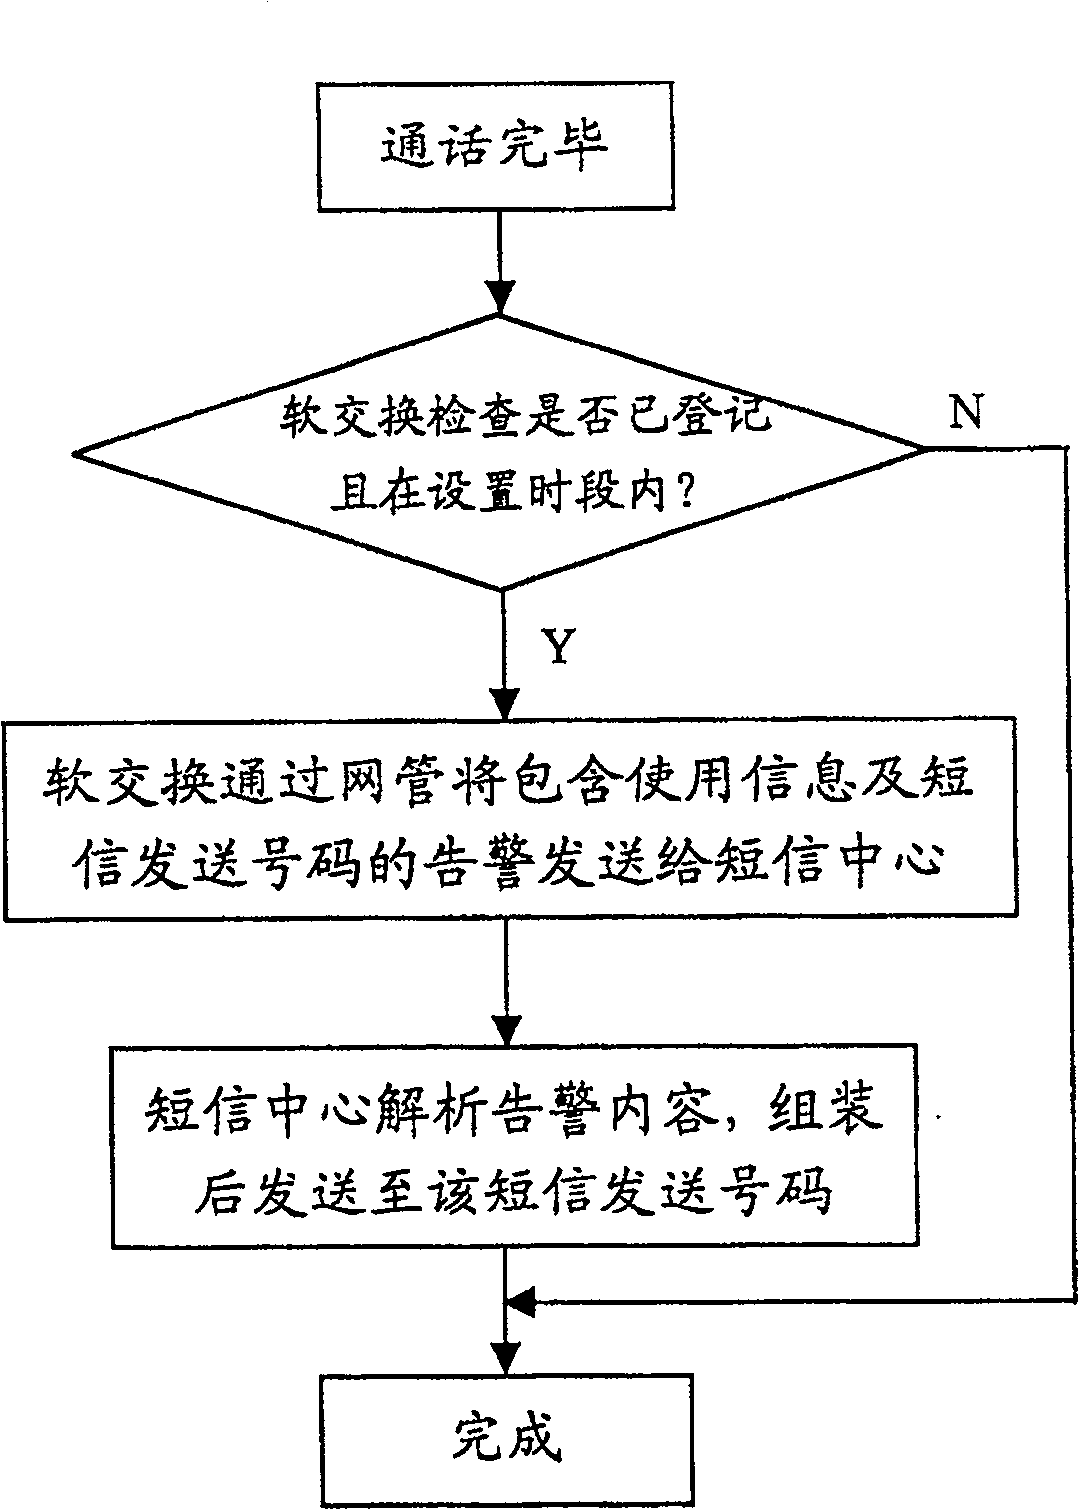 Method for monitoring telephone service condition